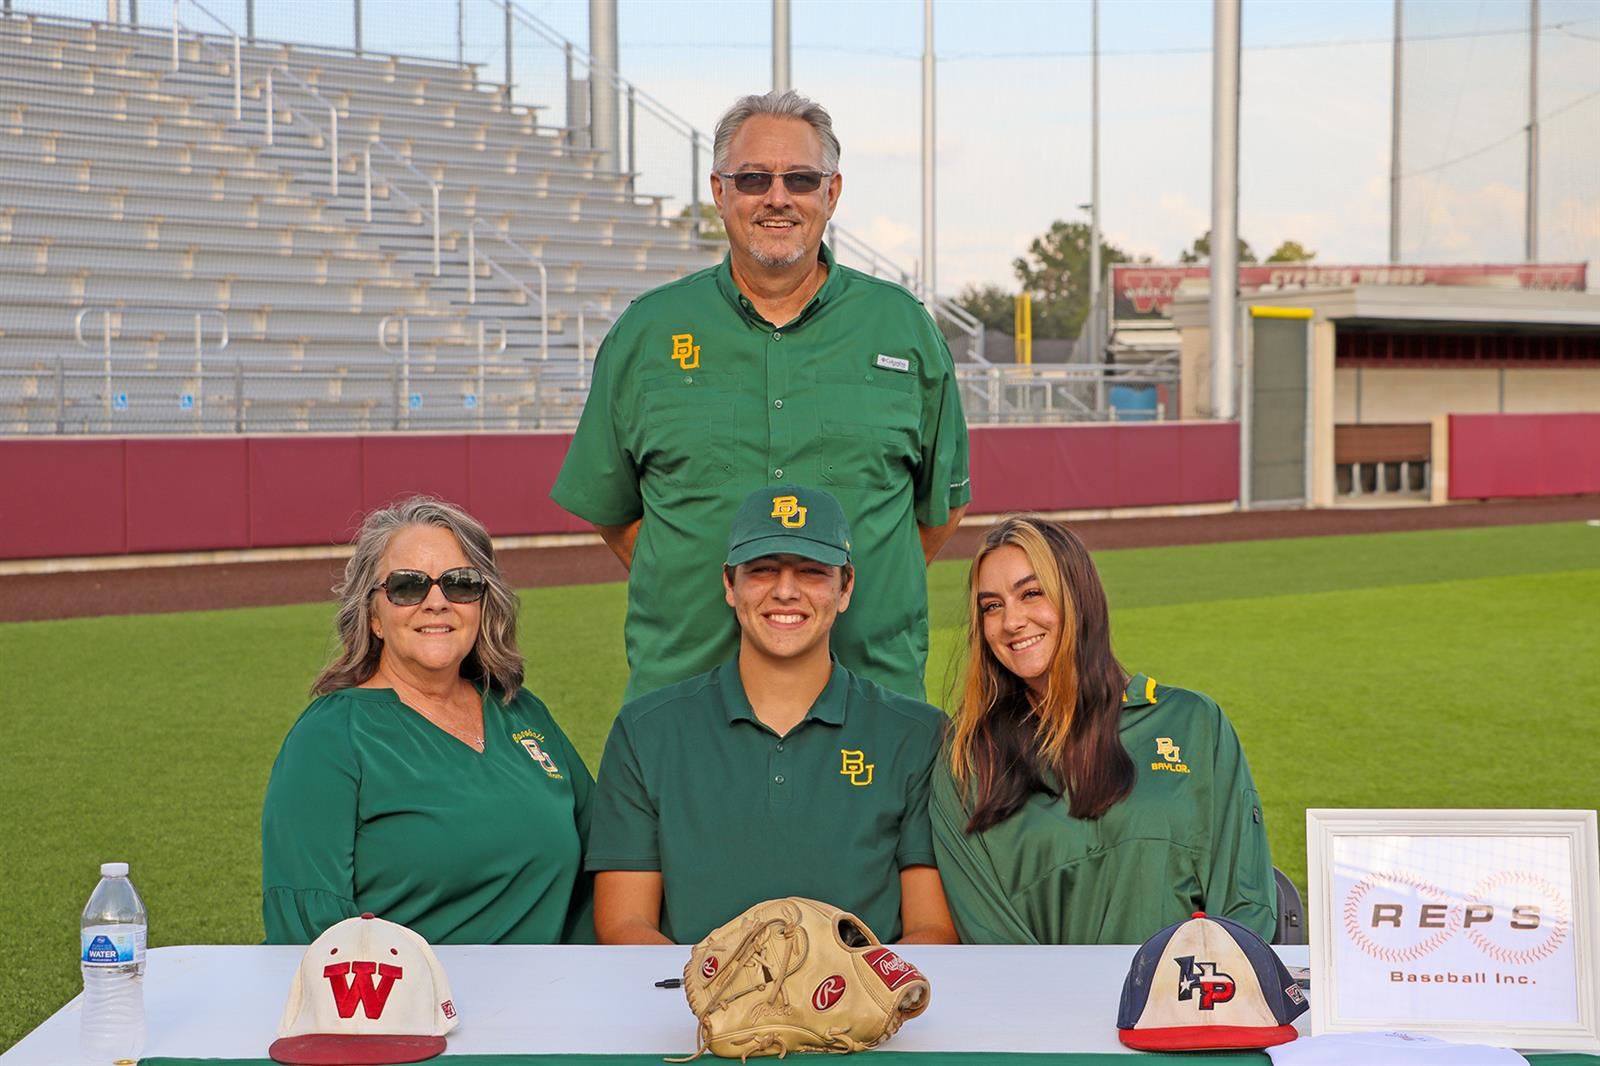 Cypress Woods High School senior Mason Green, seated center, signed a letter of intent to play baseball at Baylor University.